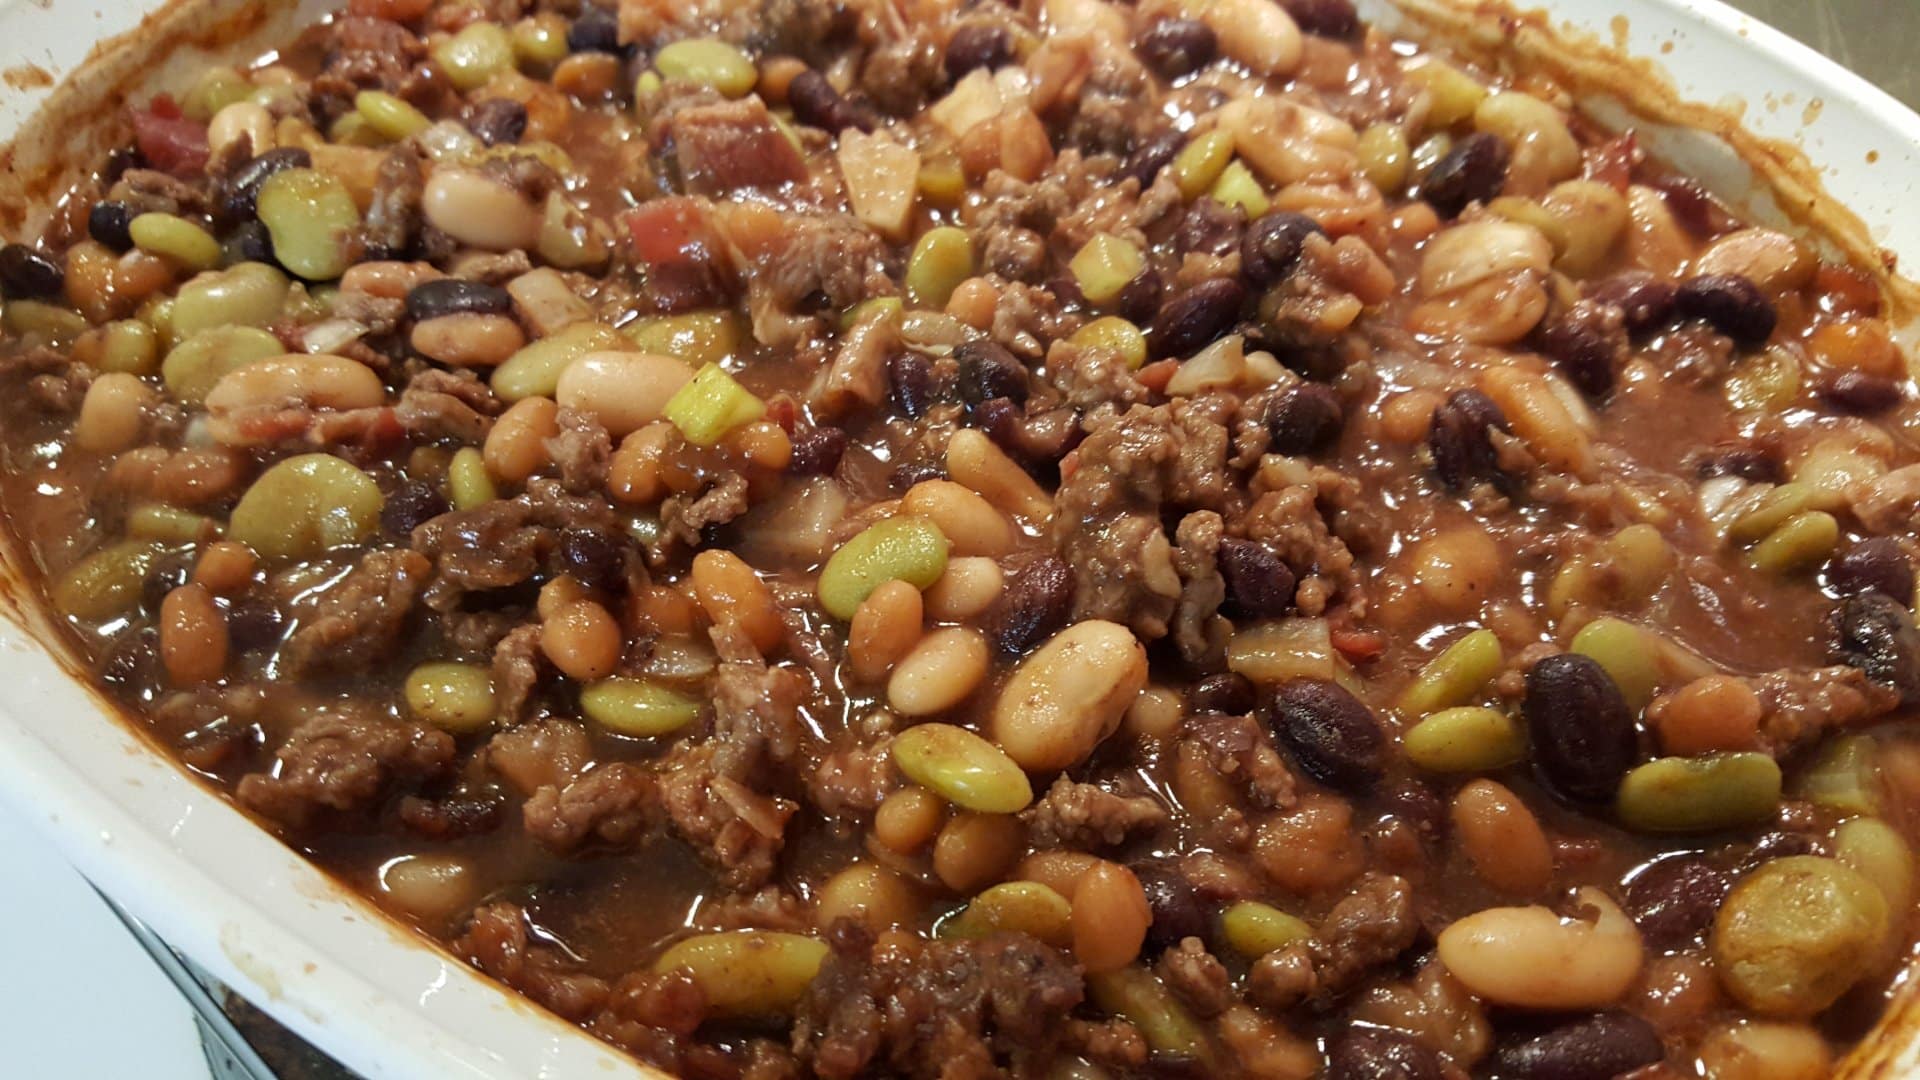 THIS CALICO BEAN CASSEROLE IS THE BEST THING YOU CAN MAKE WITH CANNED BEANS